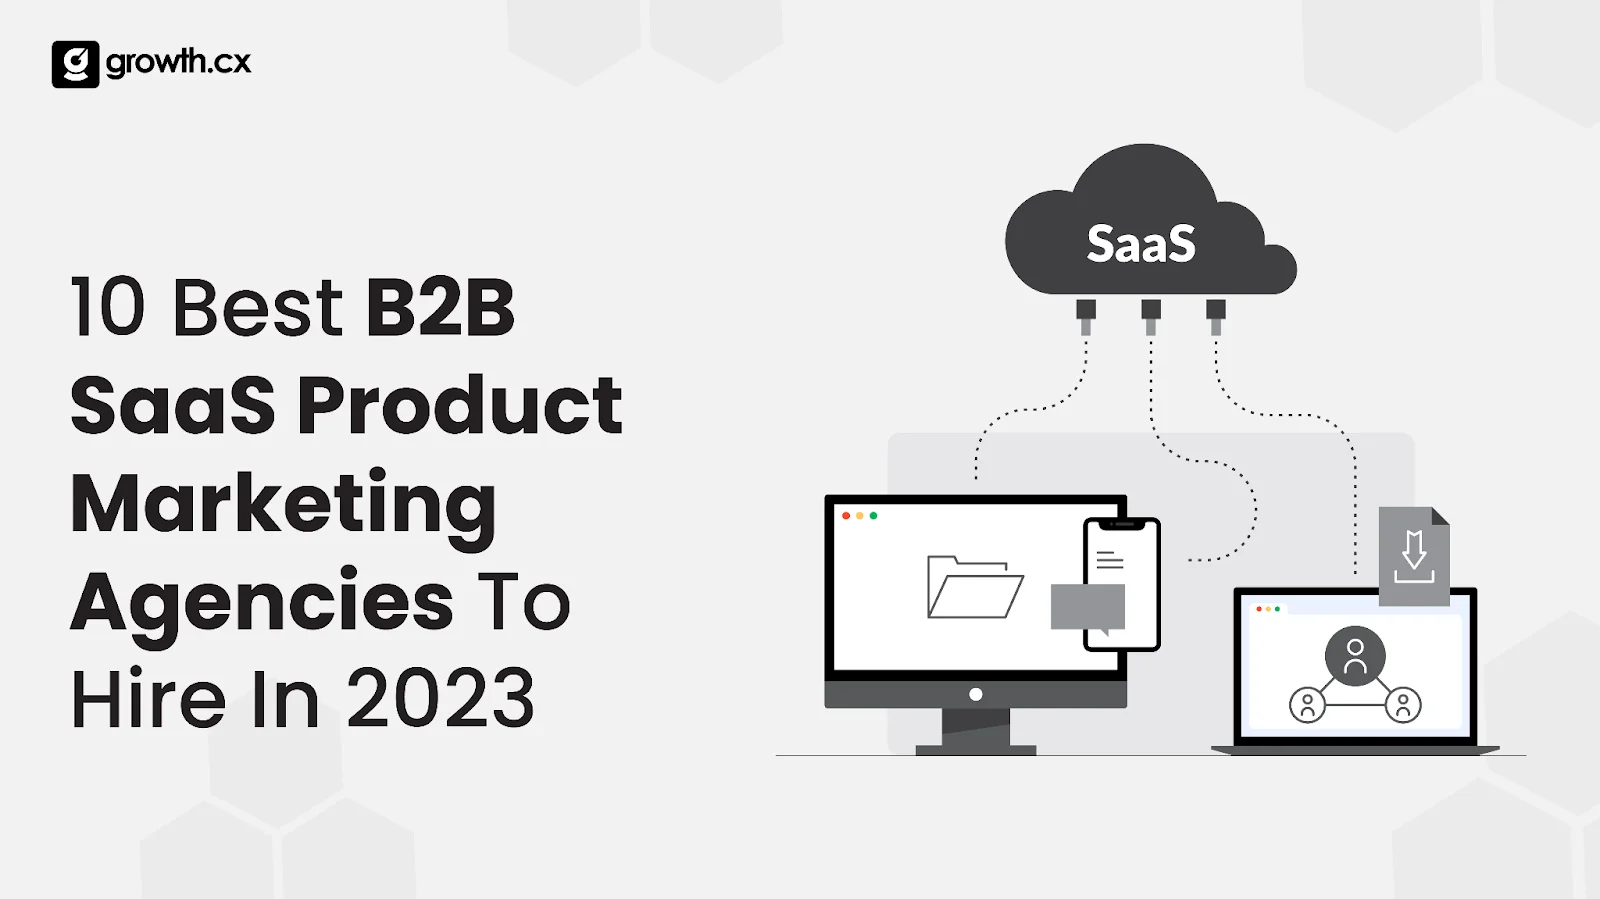 10 Best B2B SaaS Product Marketing Agencies To Hire In 2023